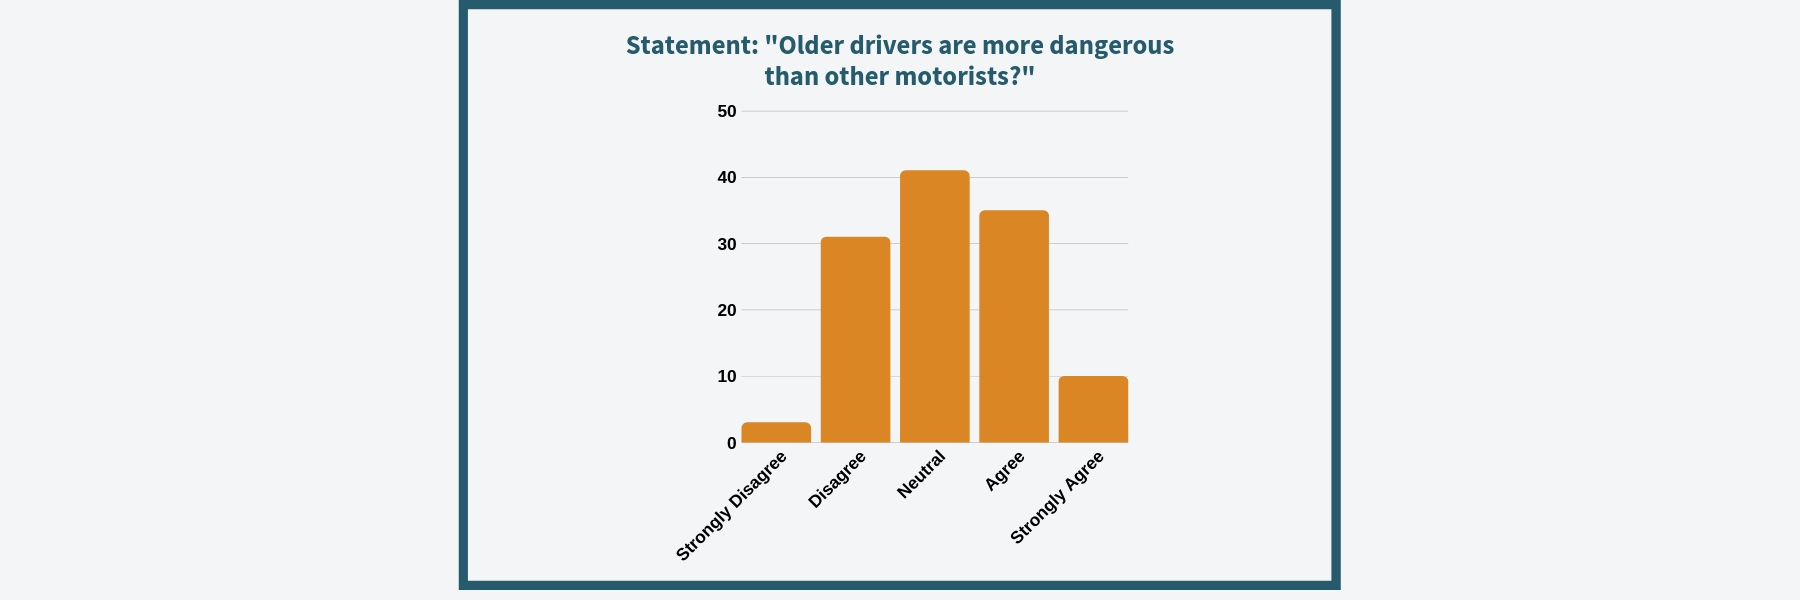 "Older drivers are more dangerous than other motorists?"